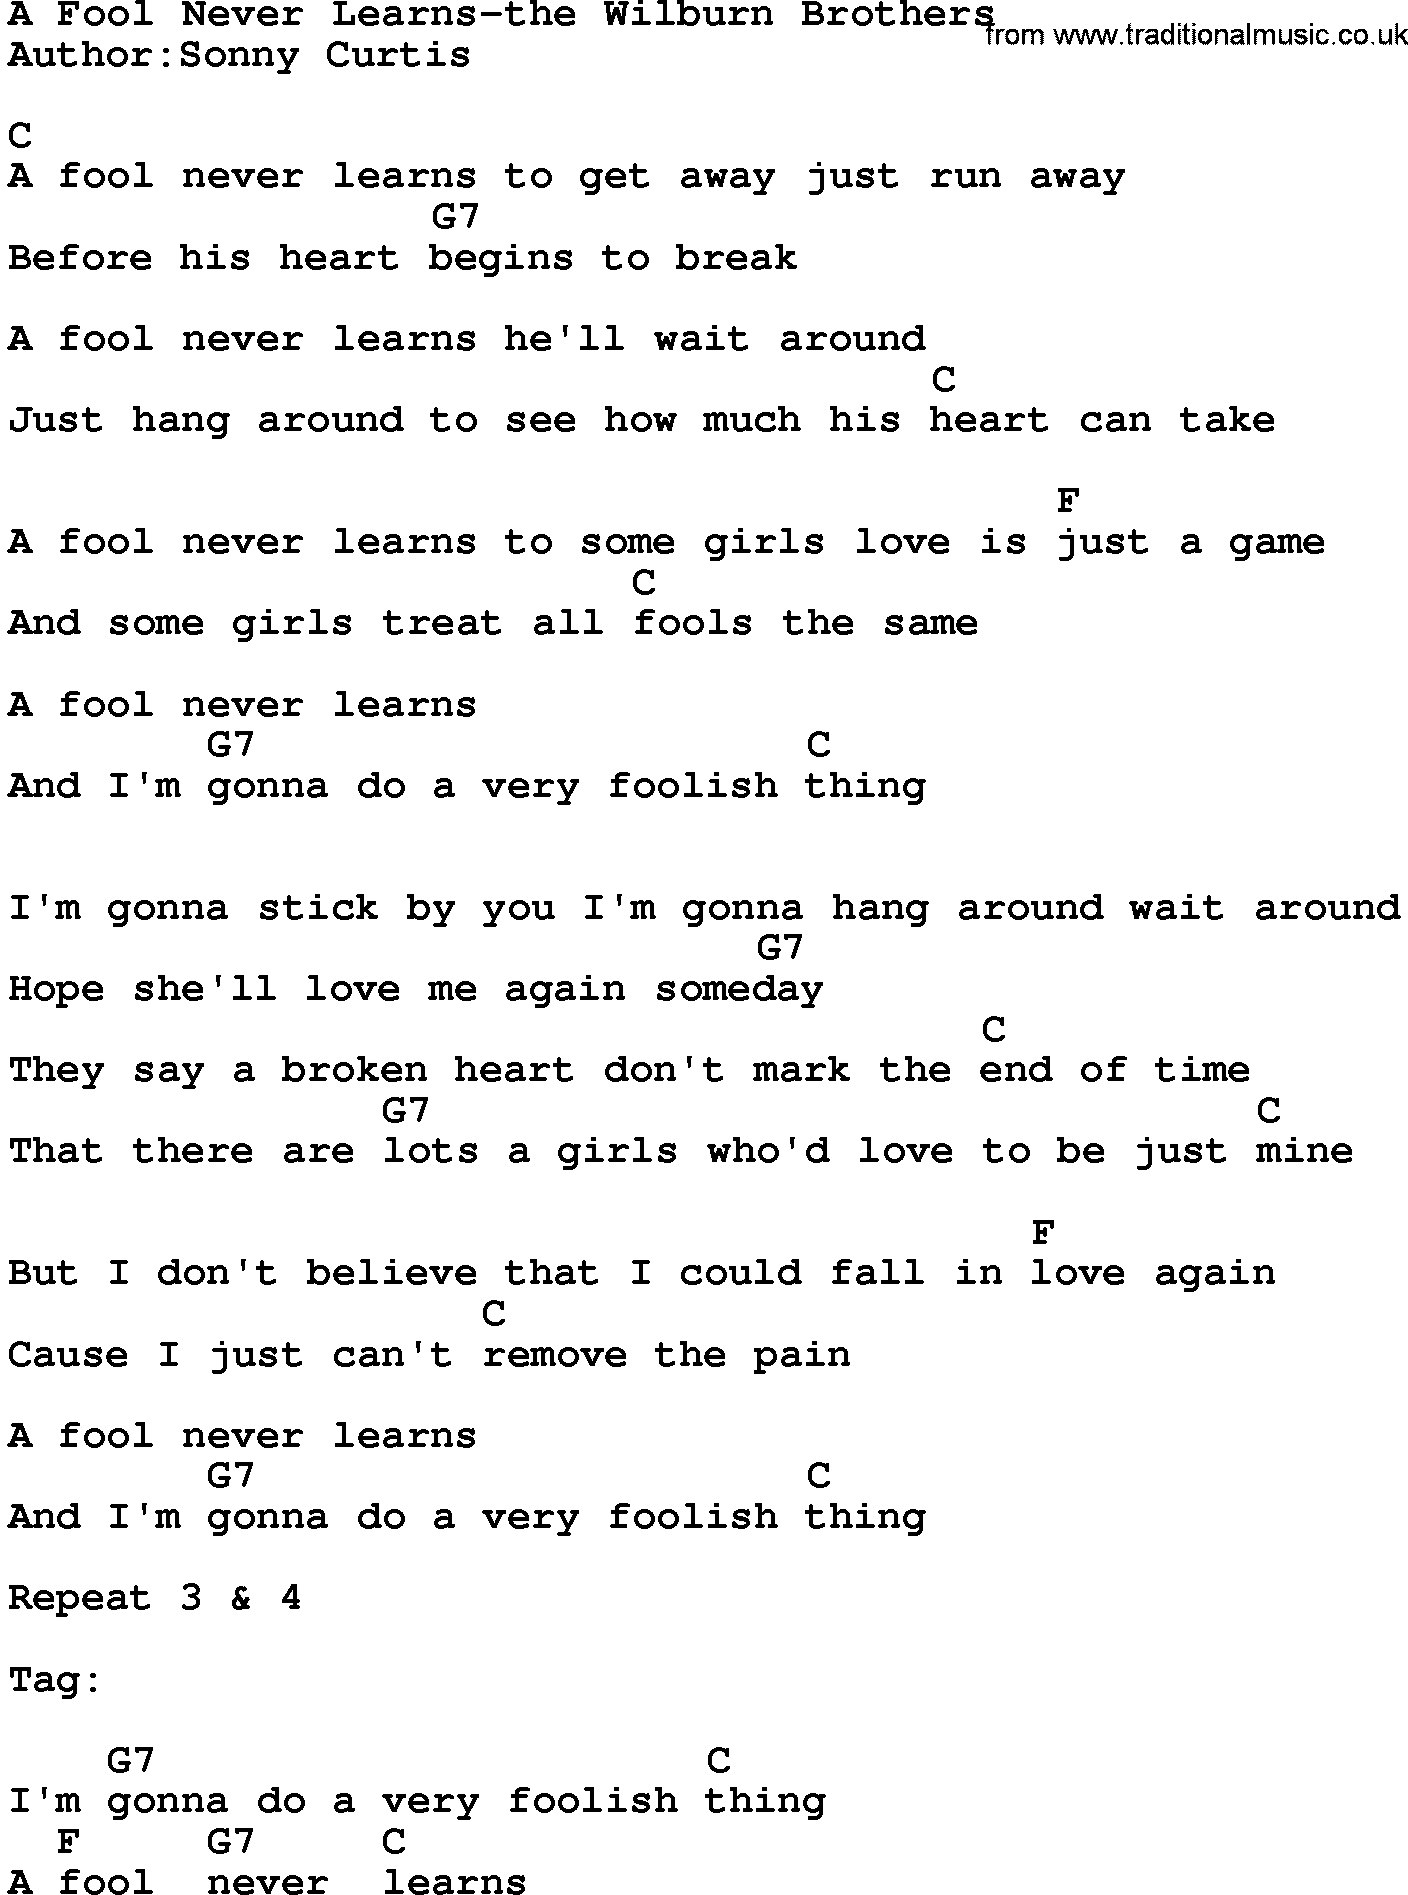 Country music song: A Fool Never Learns-The Wilburn Brothers lyrics and chords